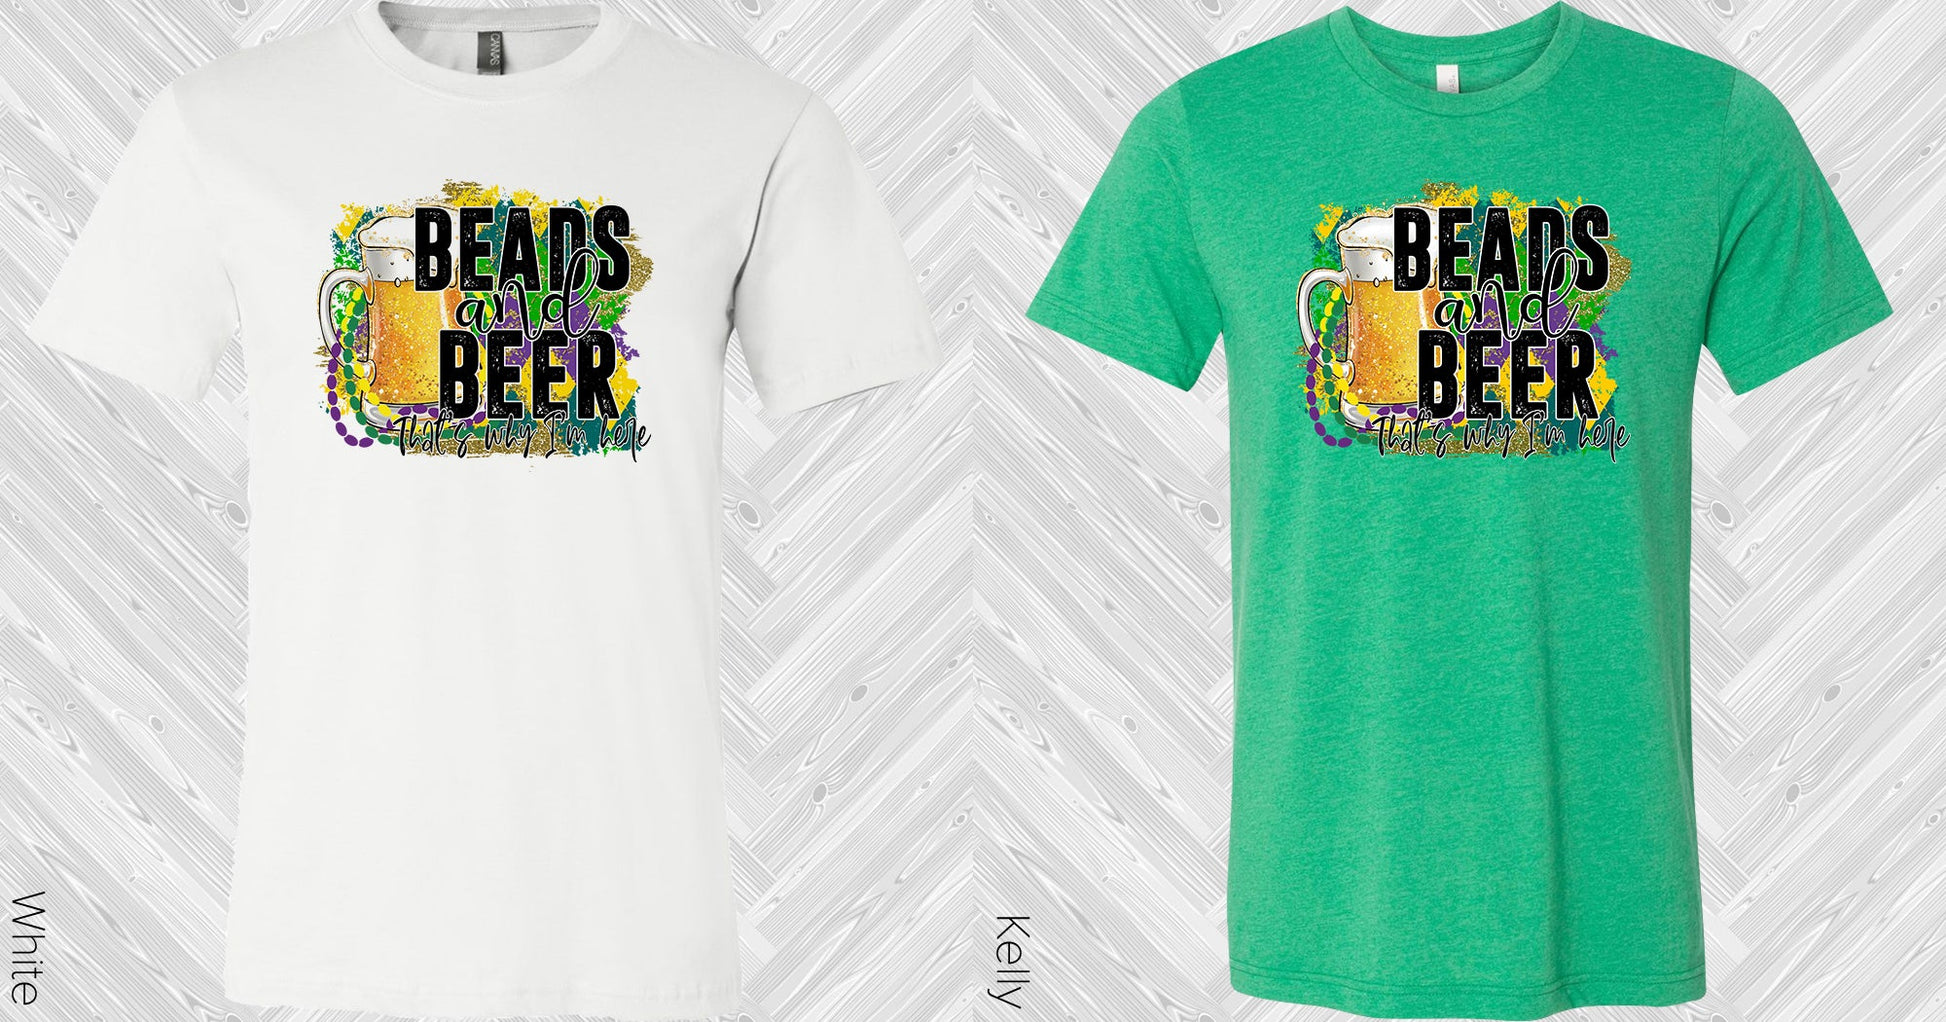 Beads & Beer Thats Why Im Here Graphic Tee Graphic Tee